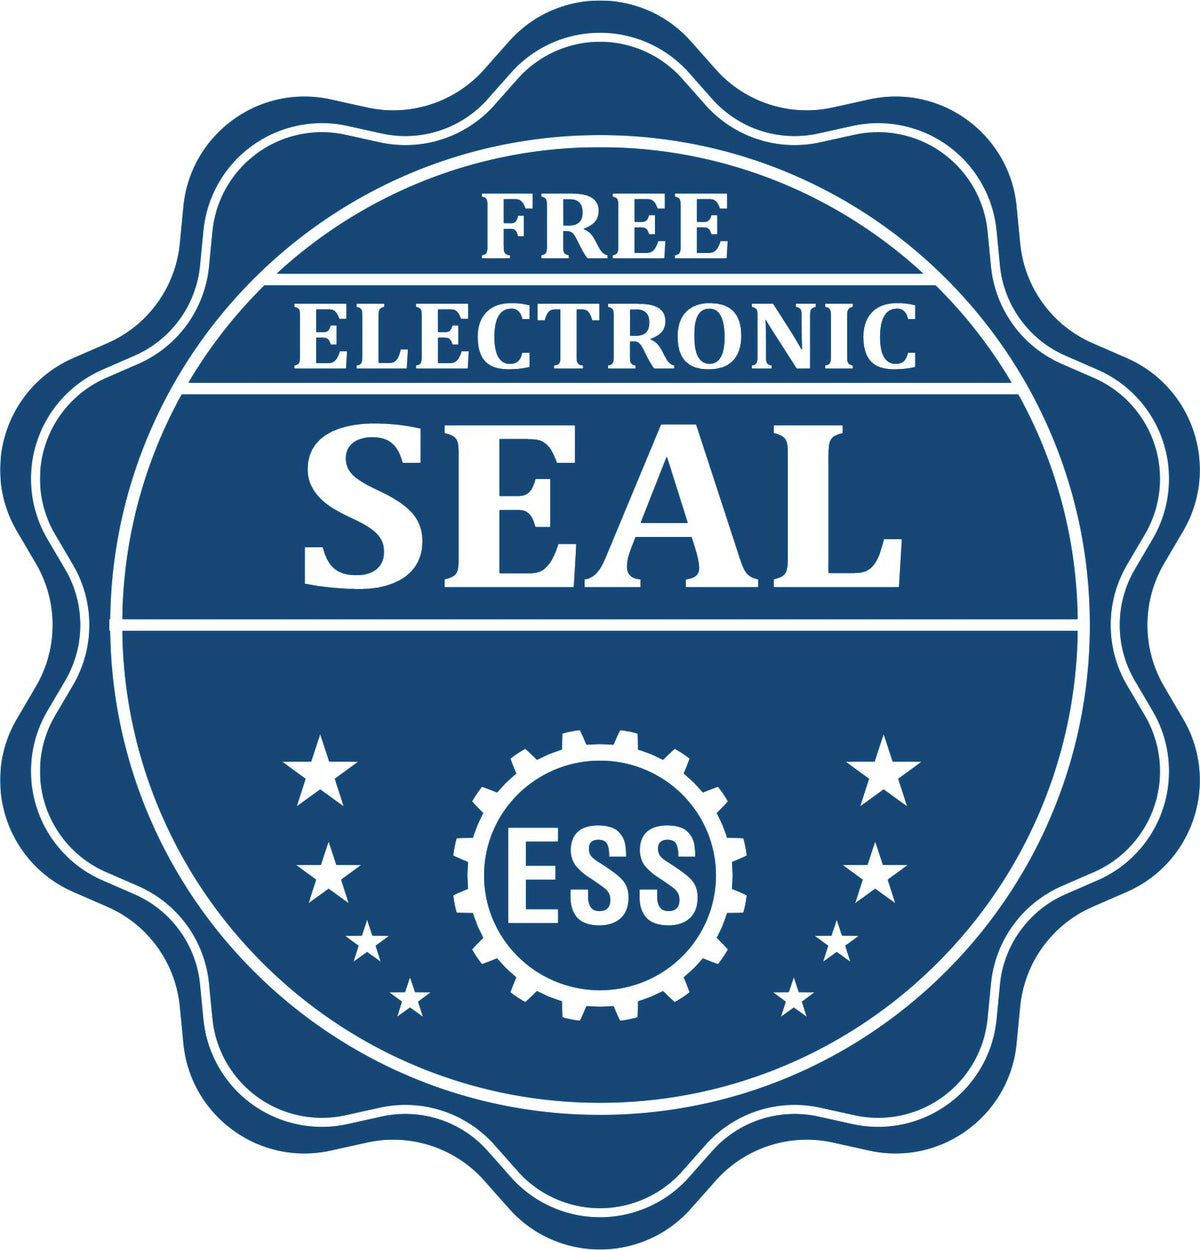 A badge showing a free electronic seal for the Gift Nebraska Landscape Architect Seal with stars and the ESS gear on the emblem.